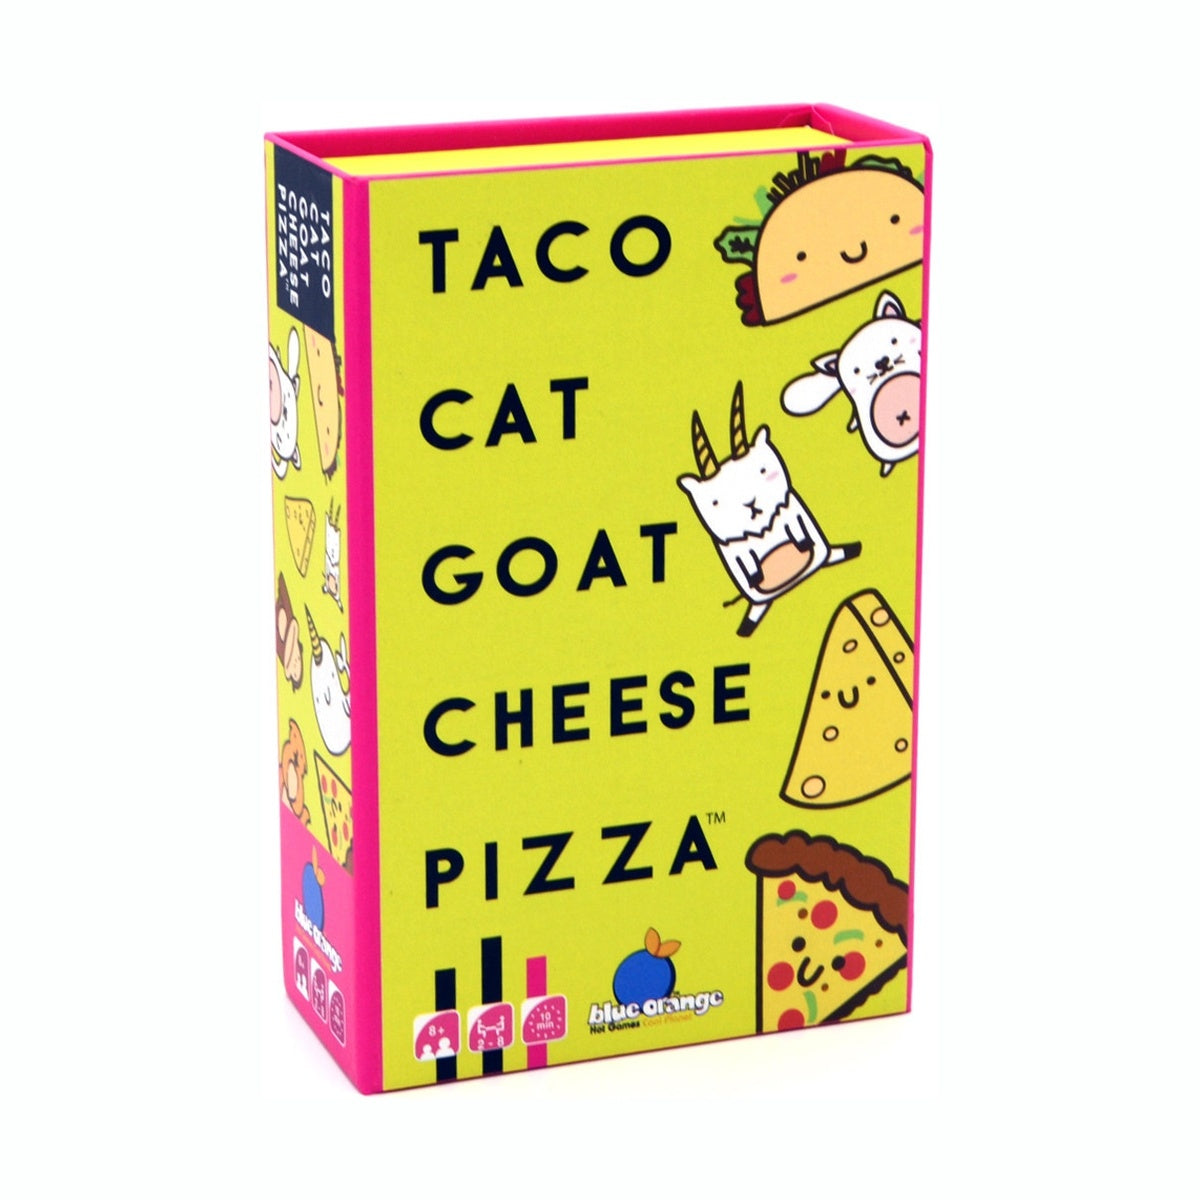 TACO! CAT! GOAT! CHEESE! PIZZA!